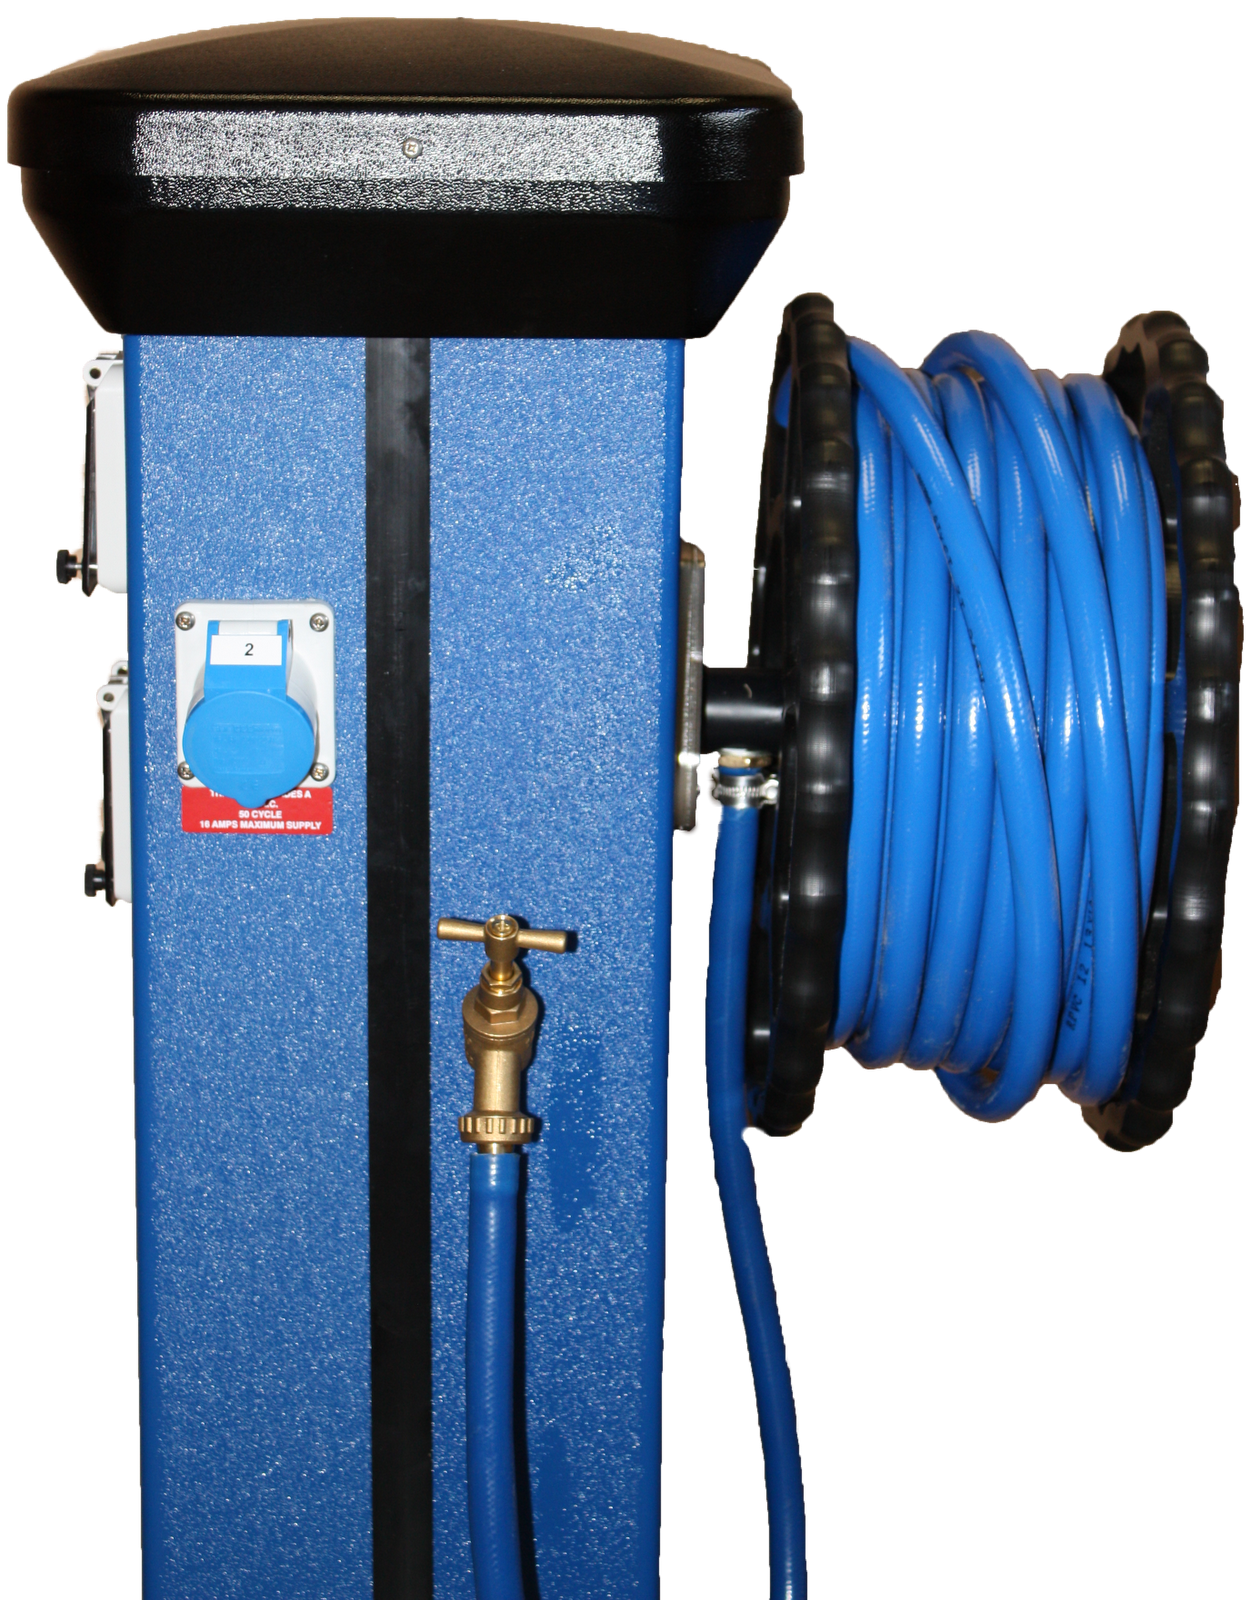 Hose Reel - A new product from Maricer! |Maricer Blog